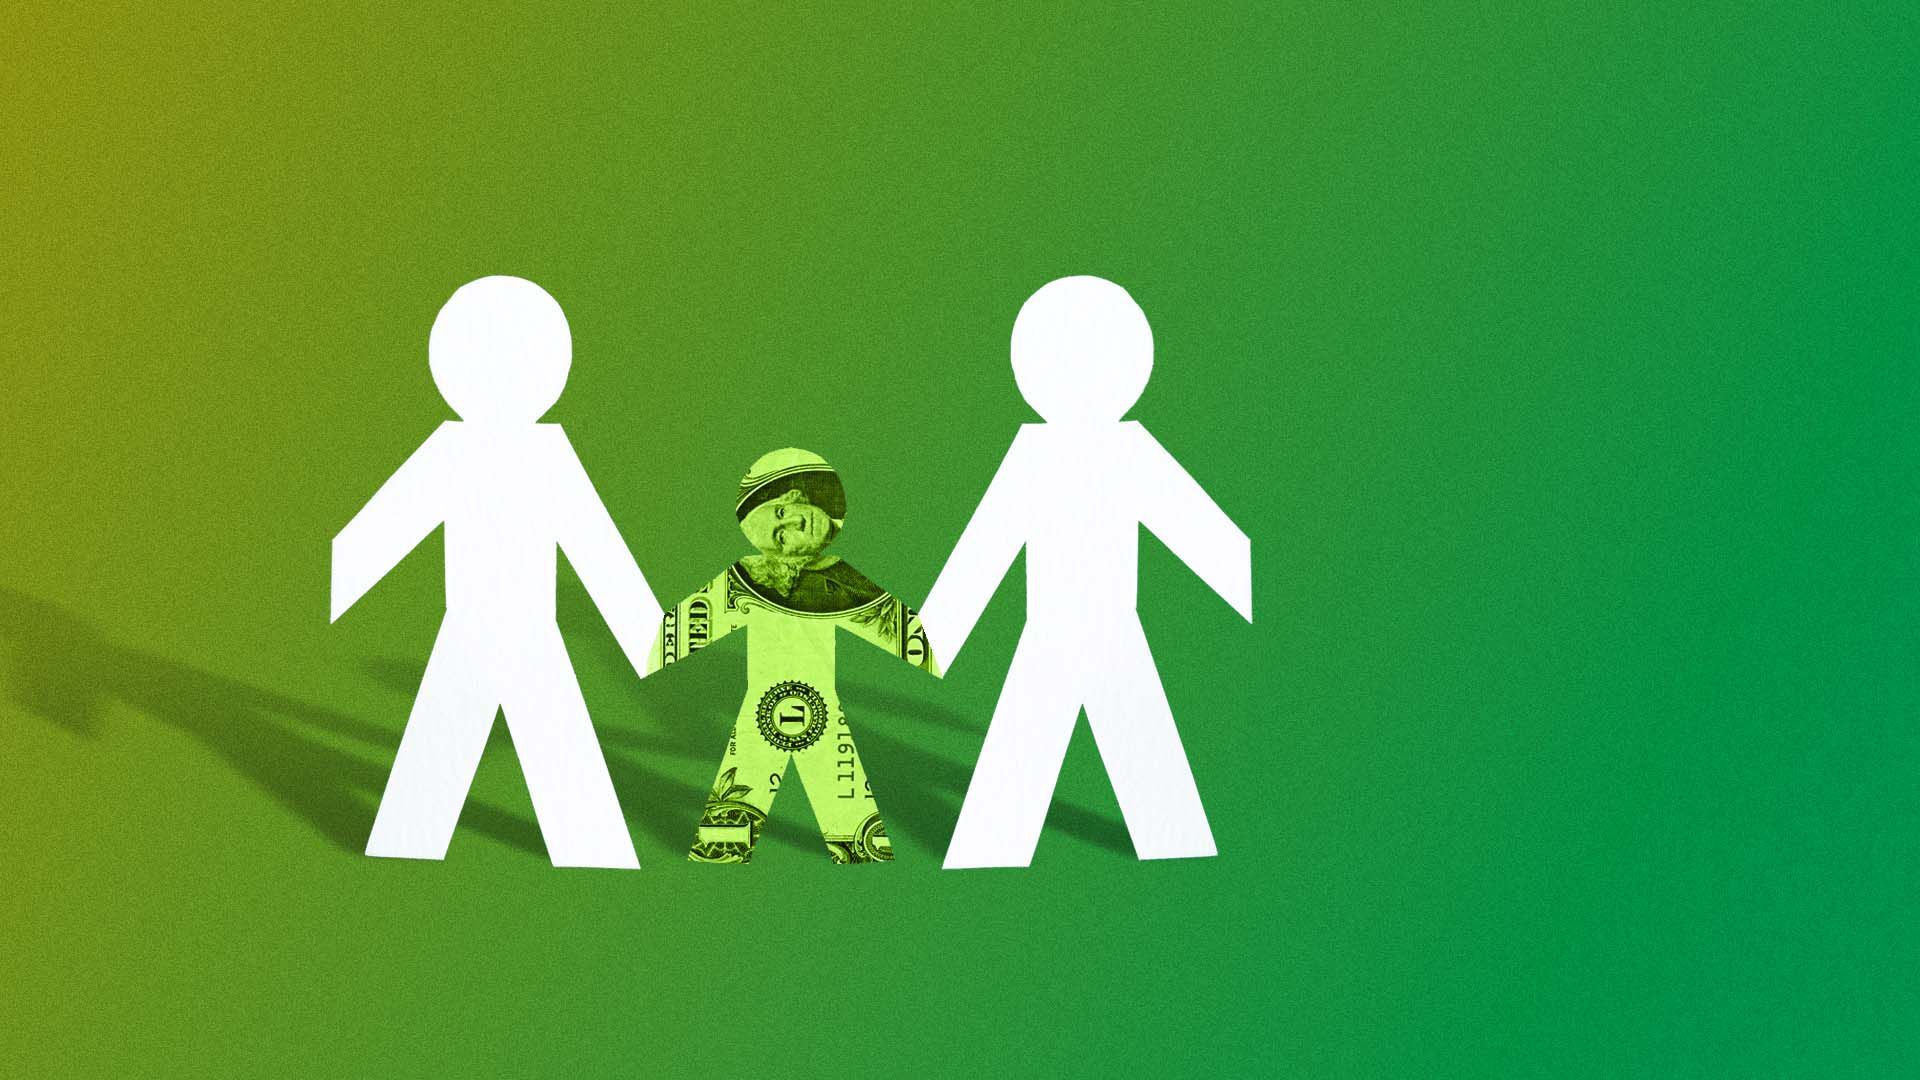 Image of paper cut family, with the child in the middle made of a dollar bill. 